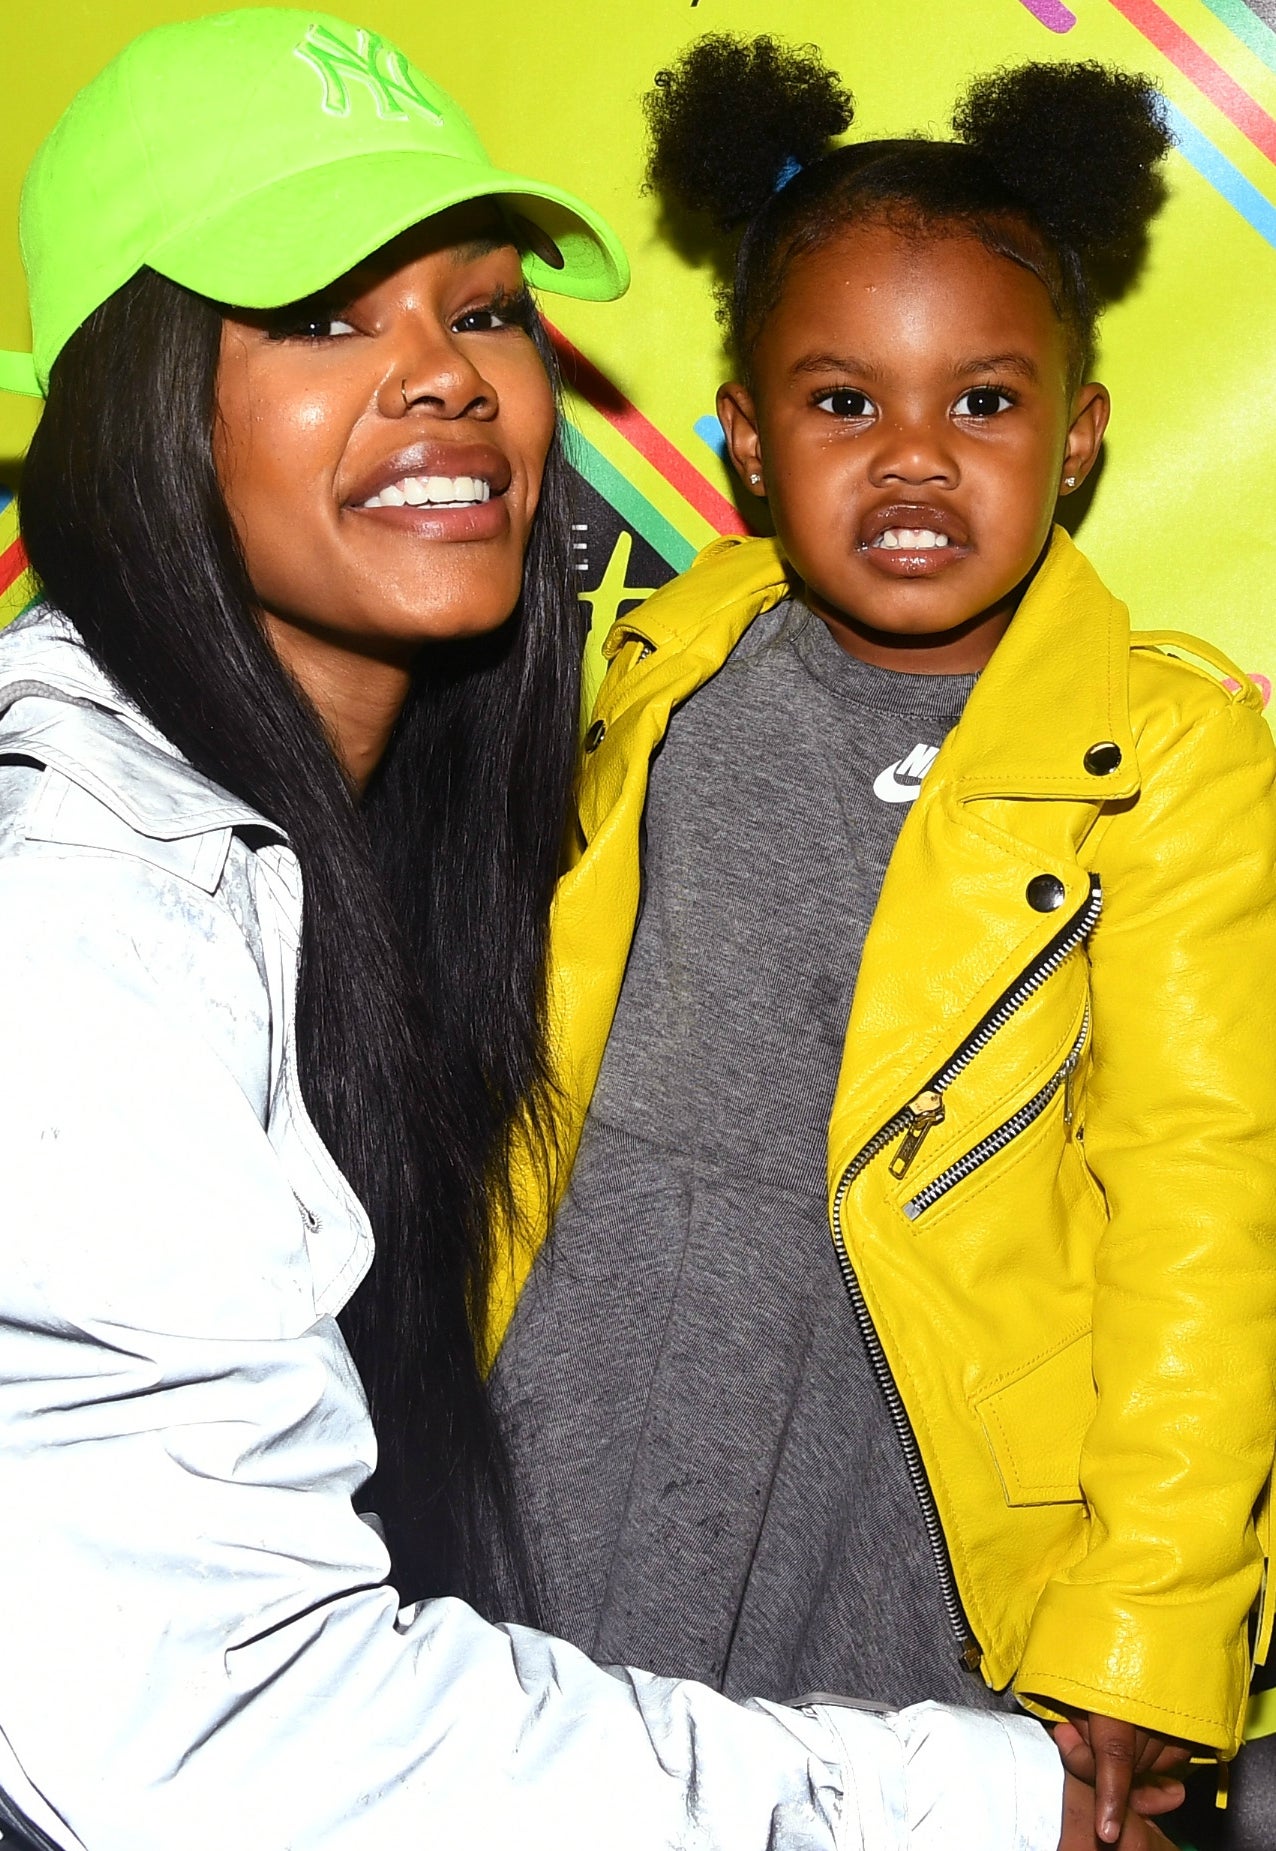 ICYMI: Teyana Taylor And Her Baby Girl Junie Stole The Show At The 2018 ESSENCE Street Style Festival